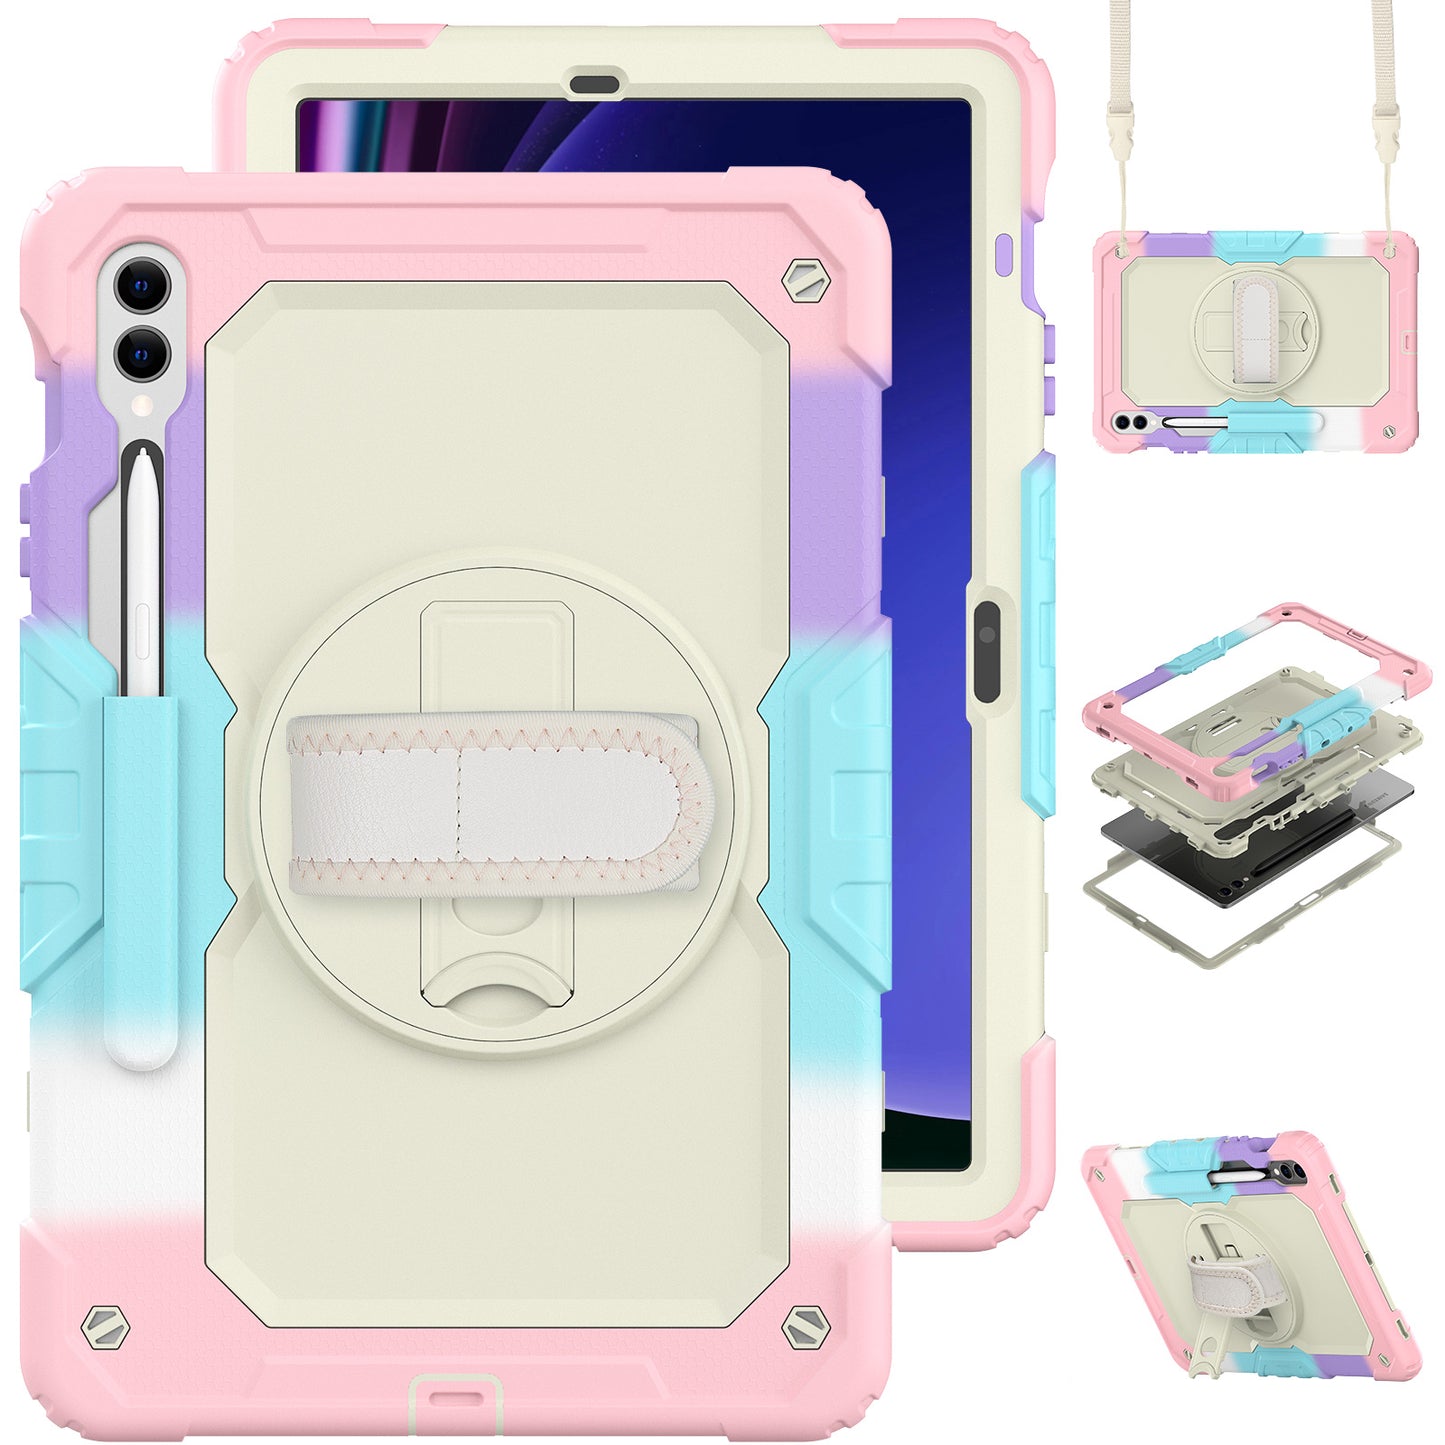 Tough Strap Galaxy Tab S9 Shockproof Case Multi-functional Built-in Screen Protector